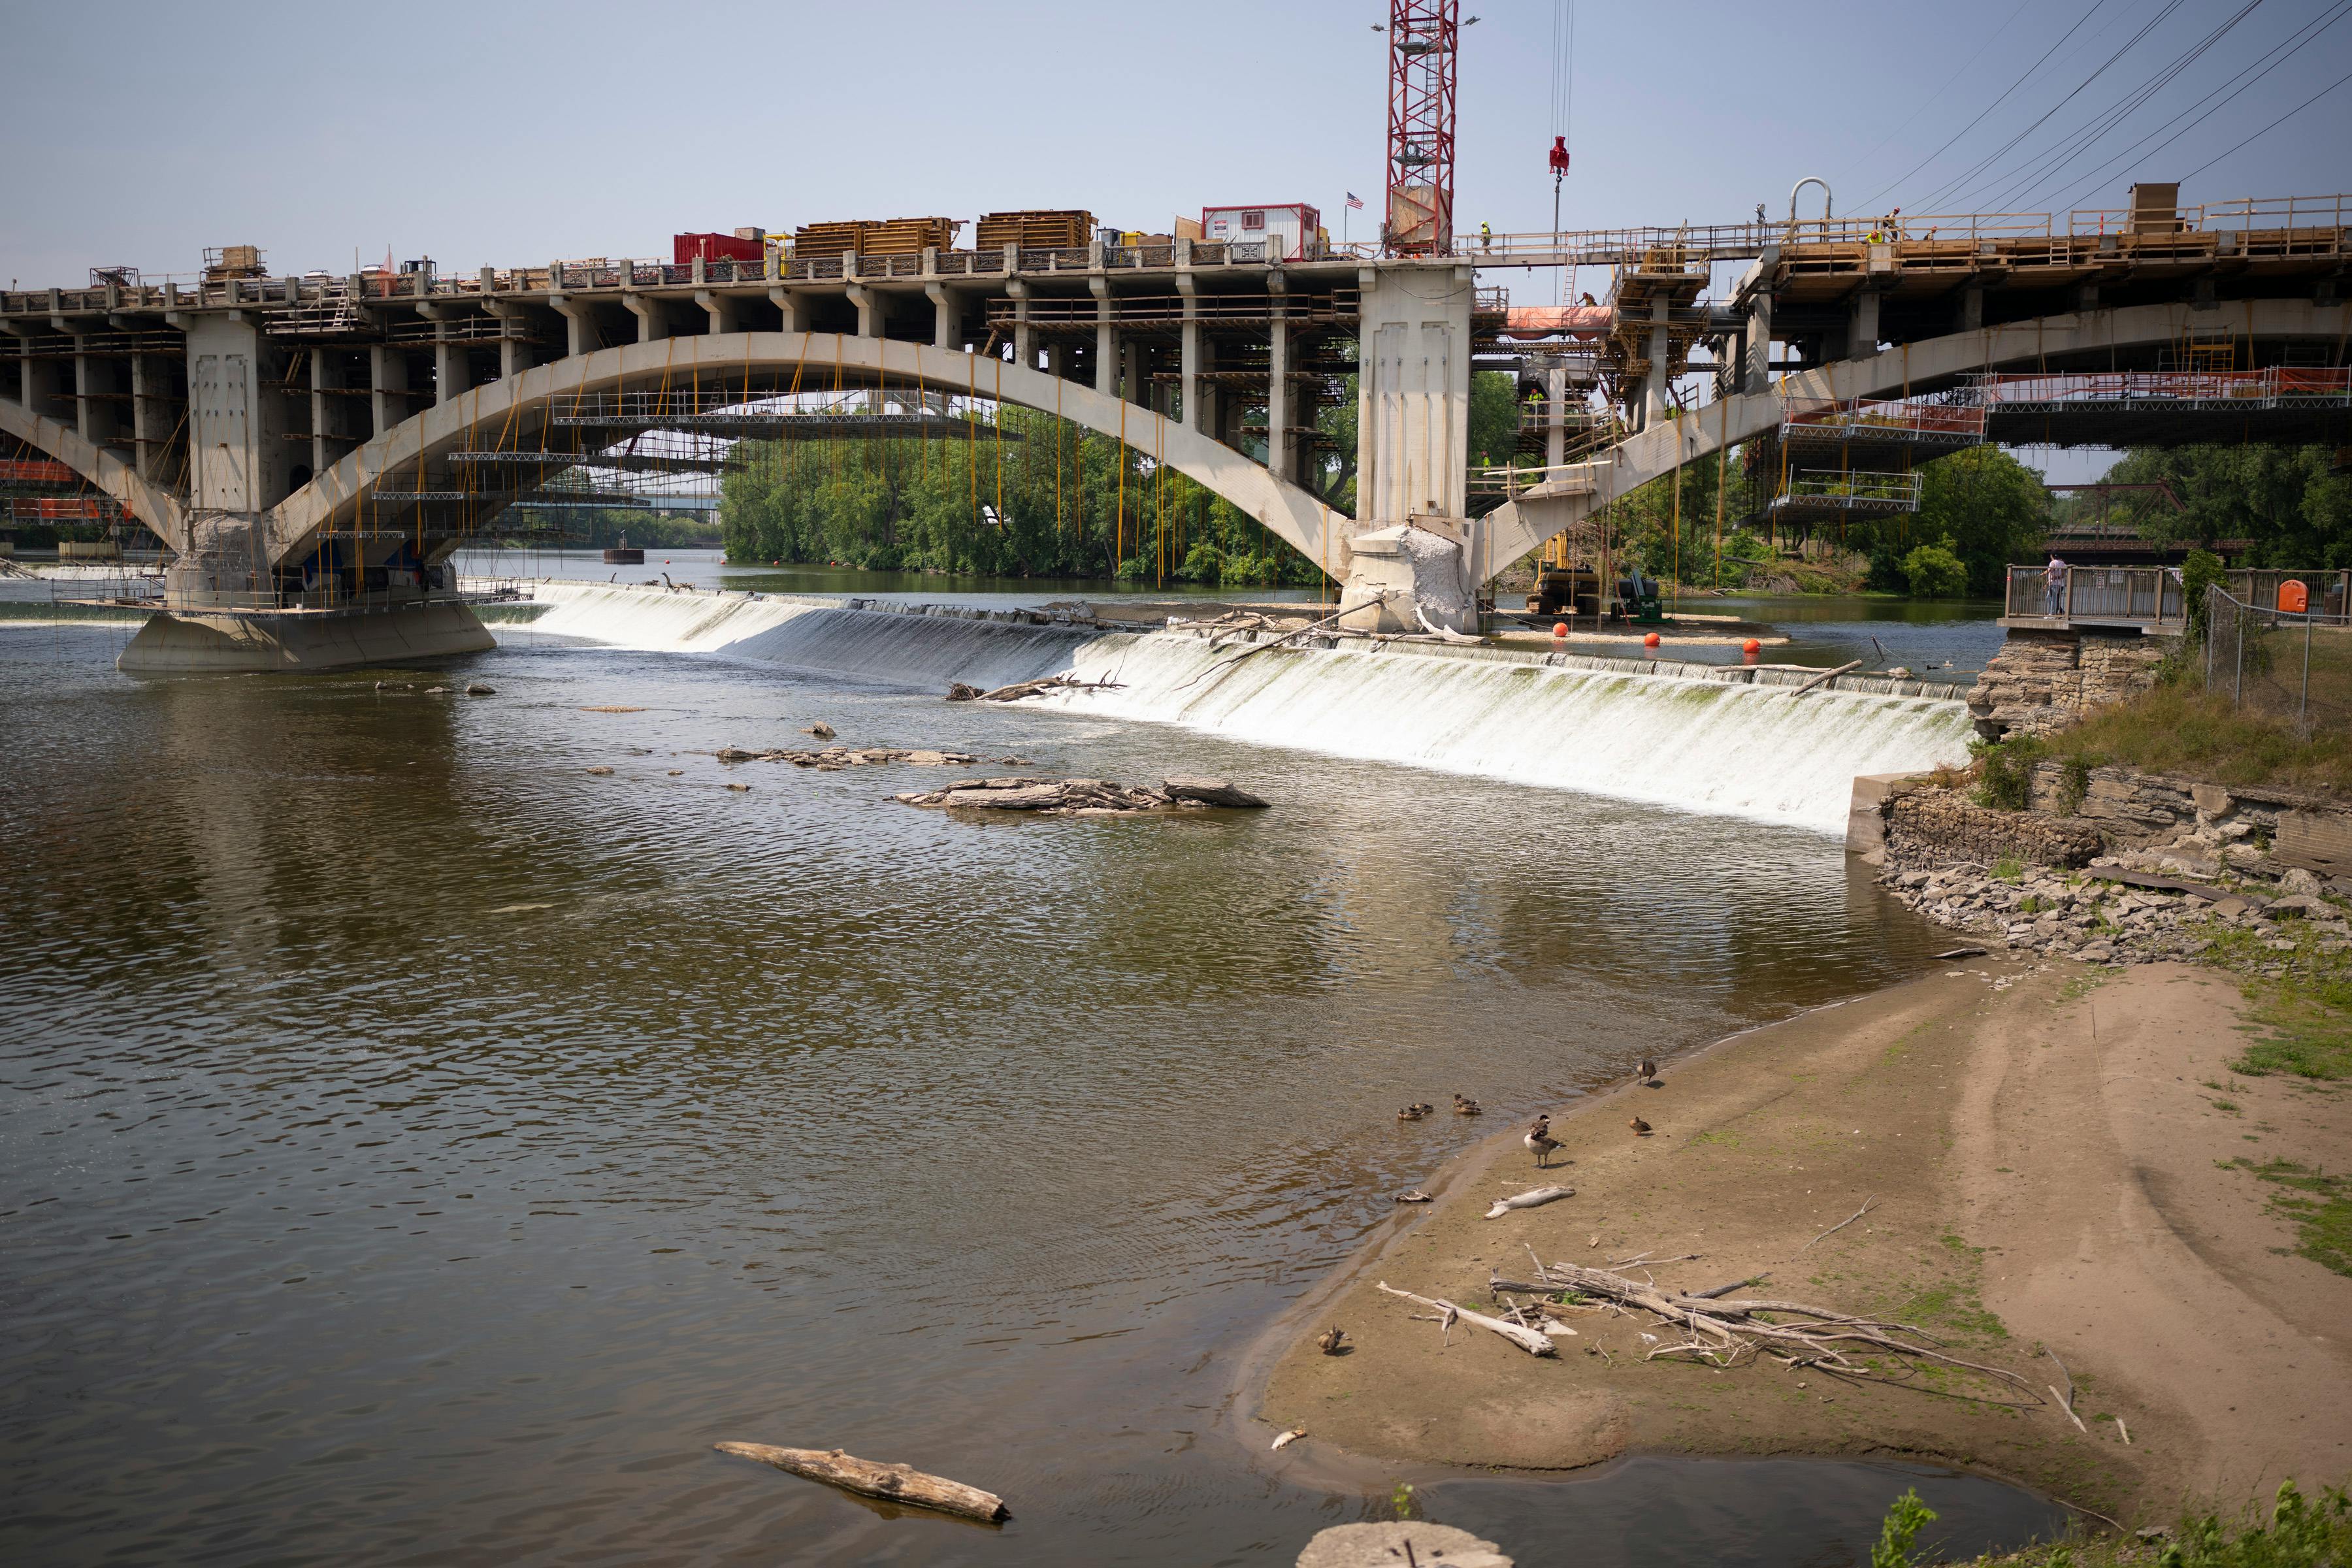 The condition of the underground wall spanning a portion of this area upstream from St. Anthony falls concerns riverfront historian John Anfinson.